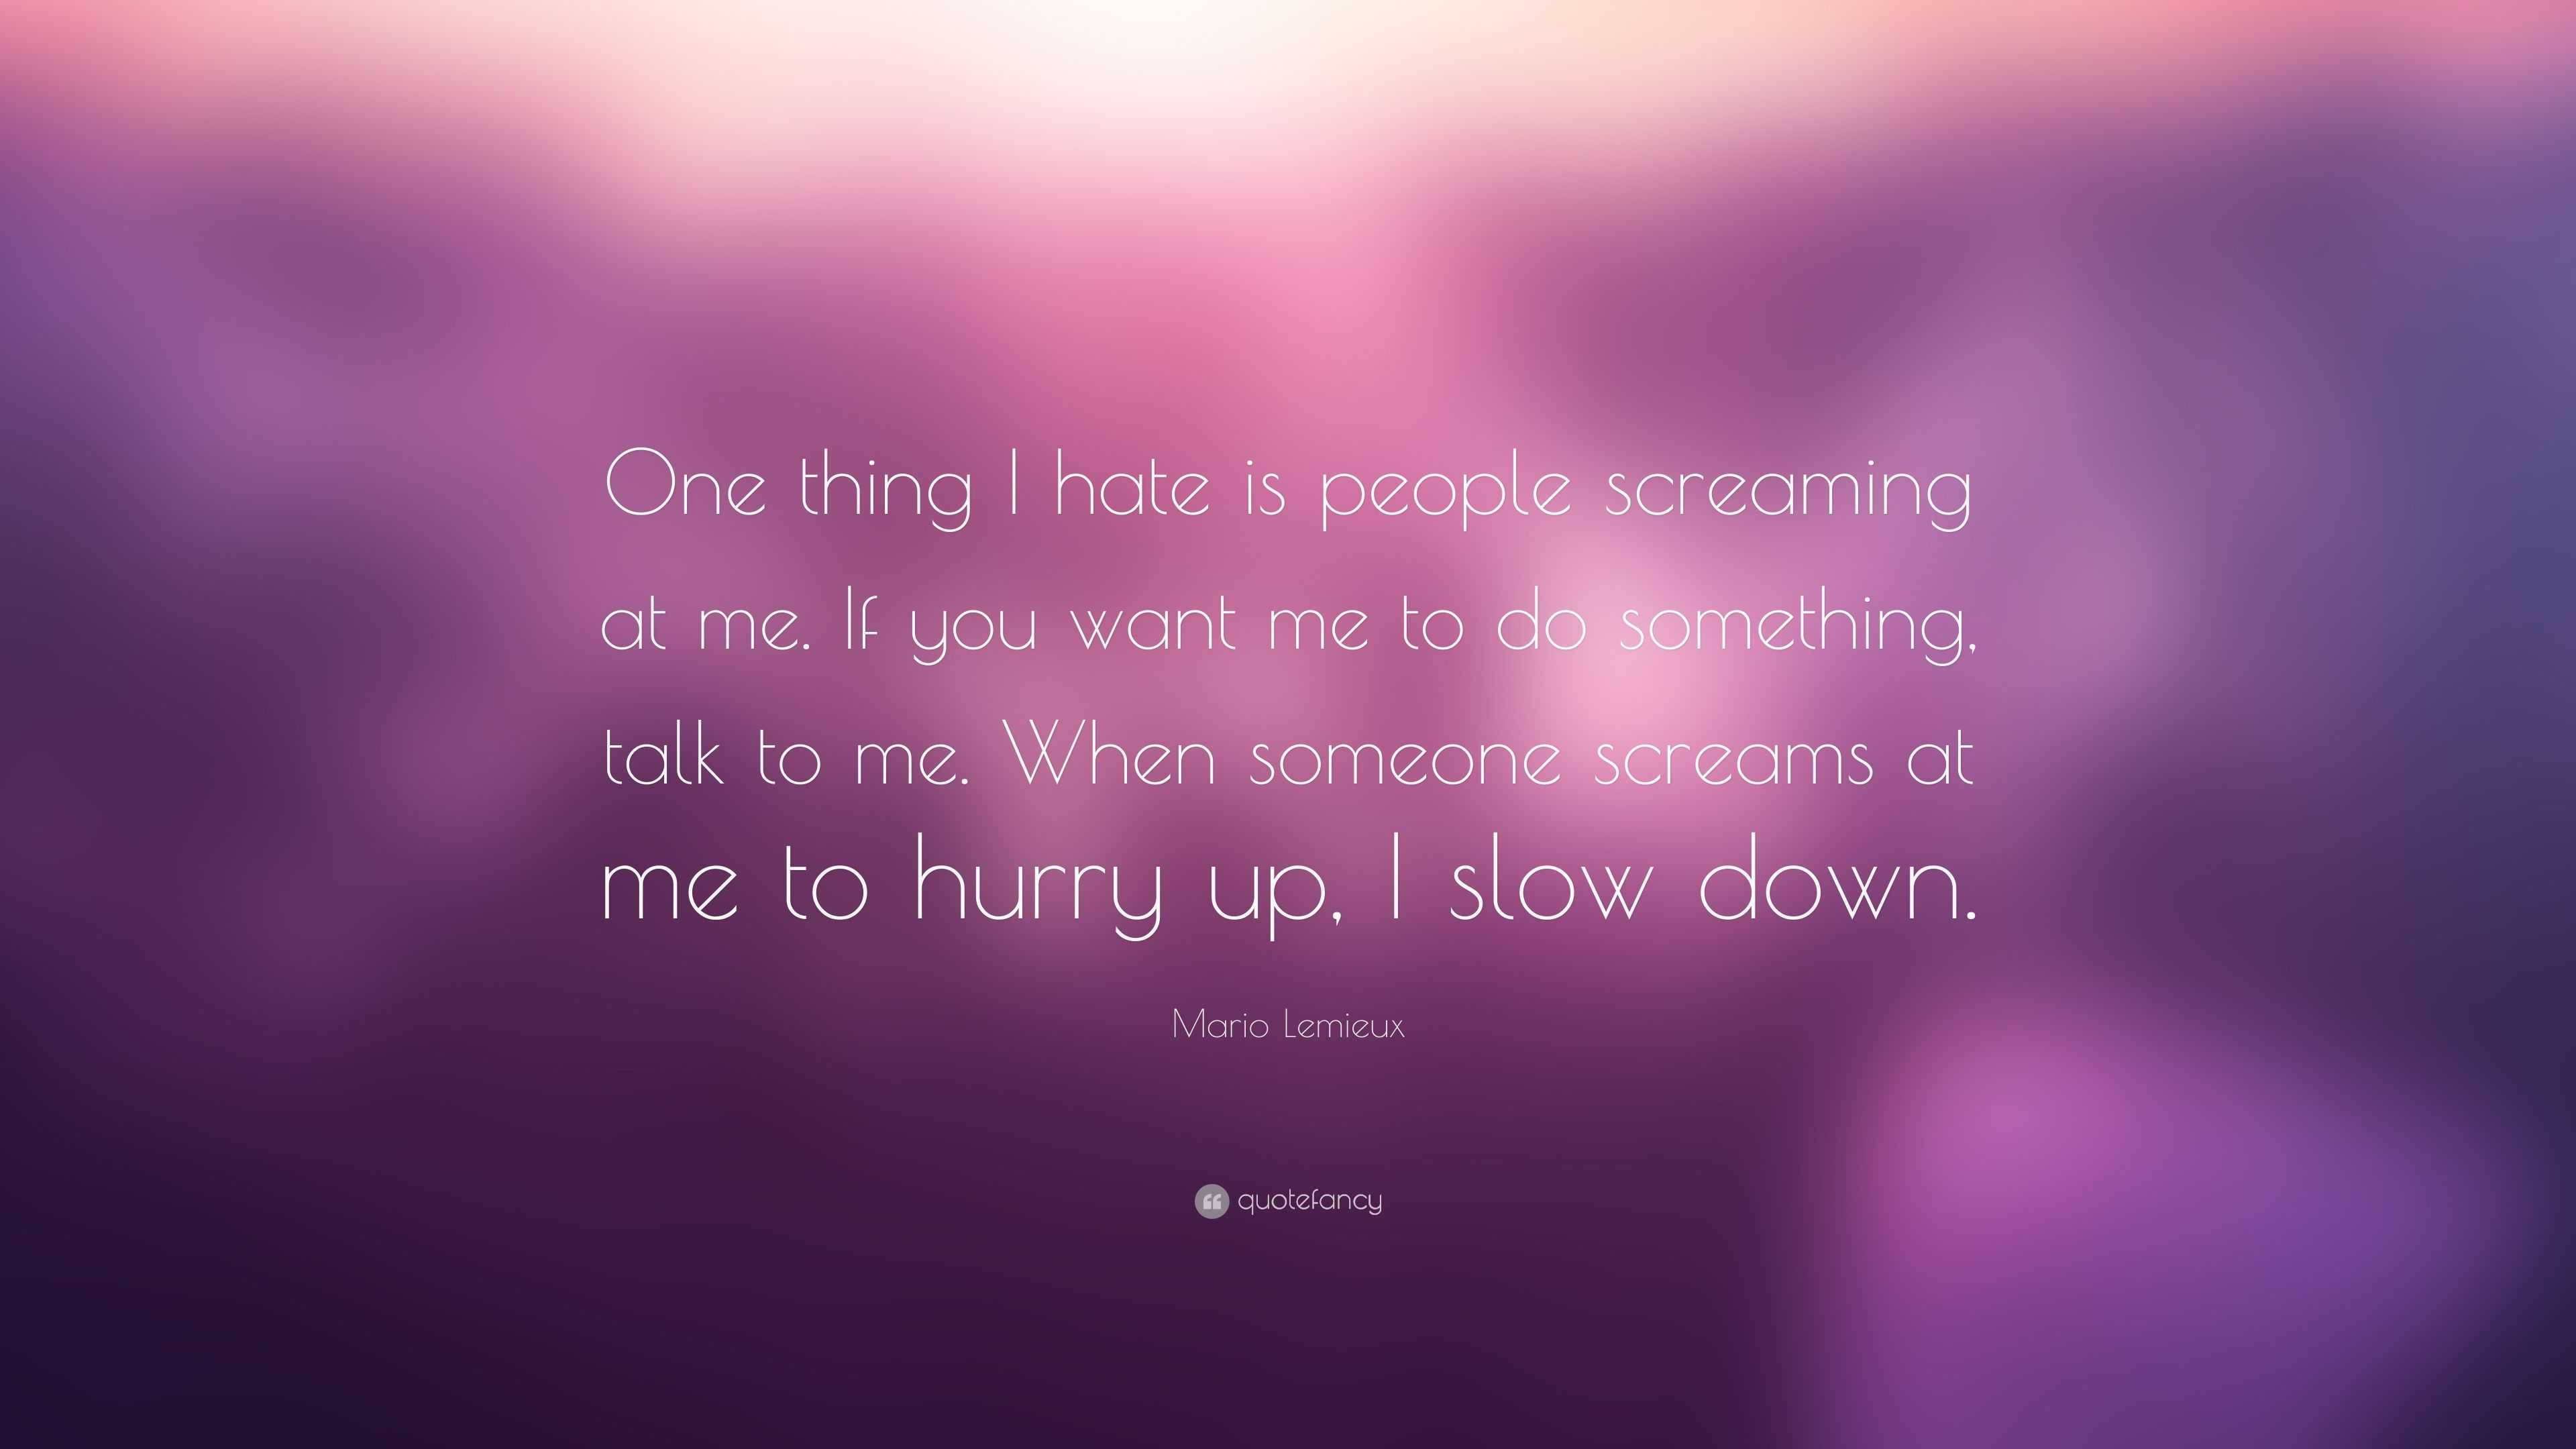 Mario Lemieux Quote: “One thing I hate is people screaming at me. If ...